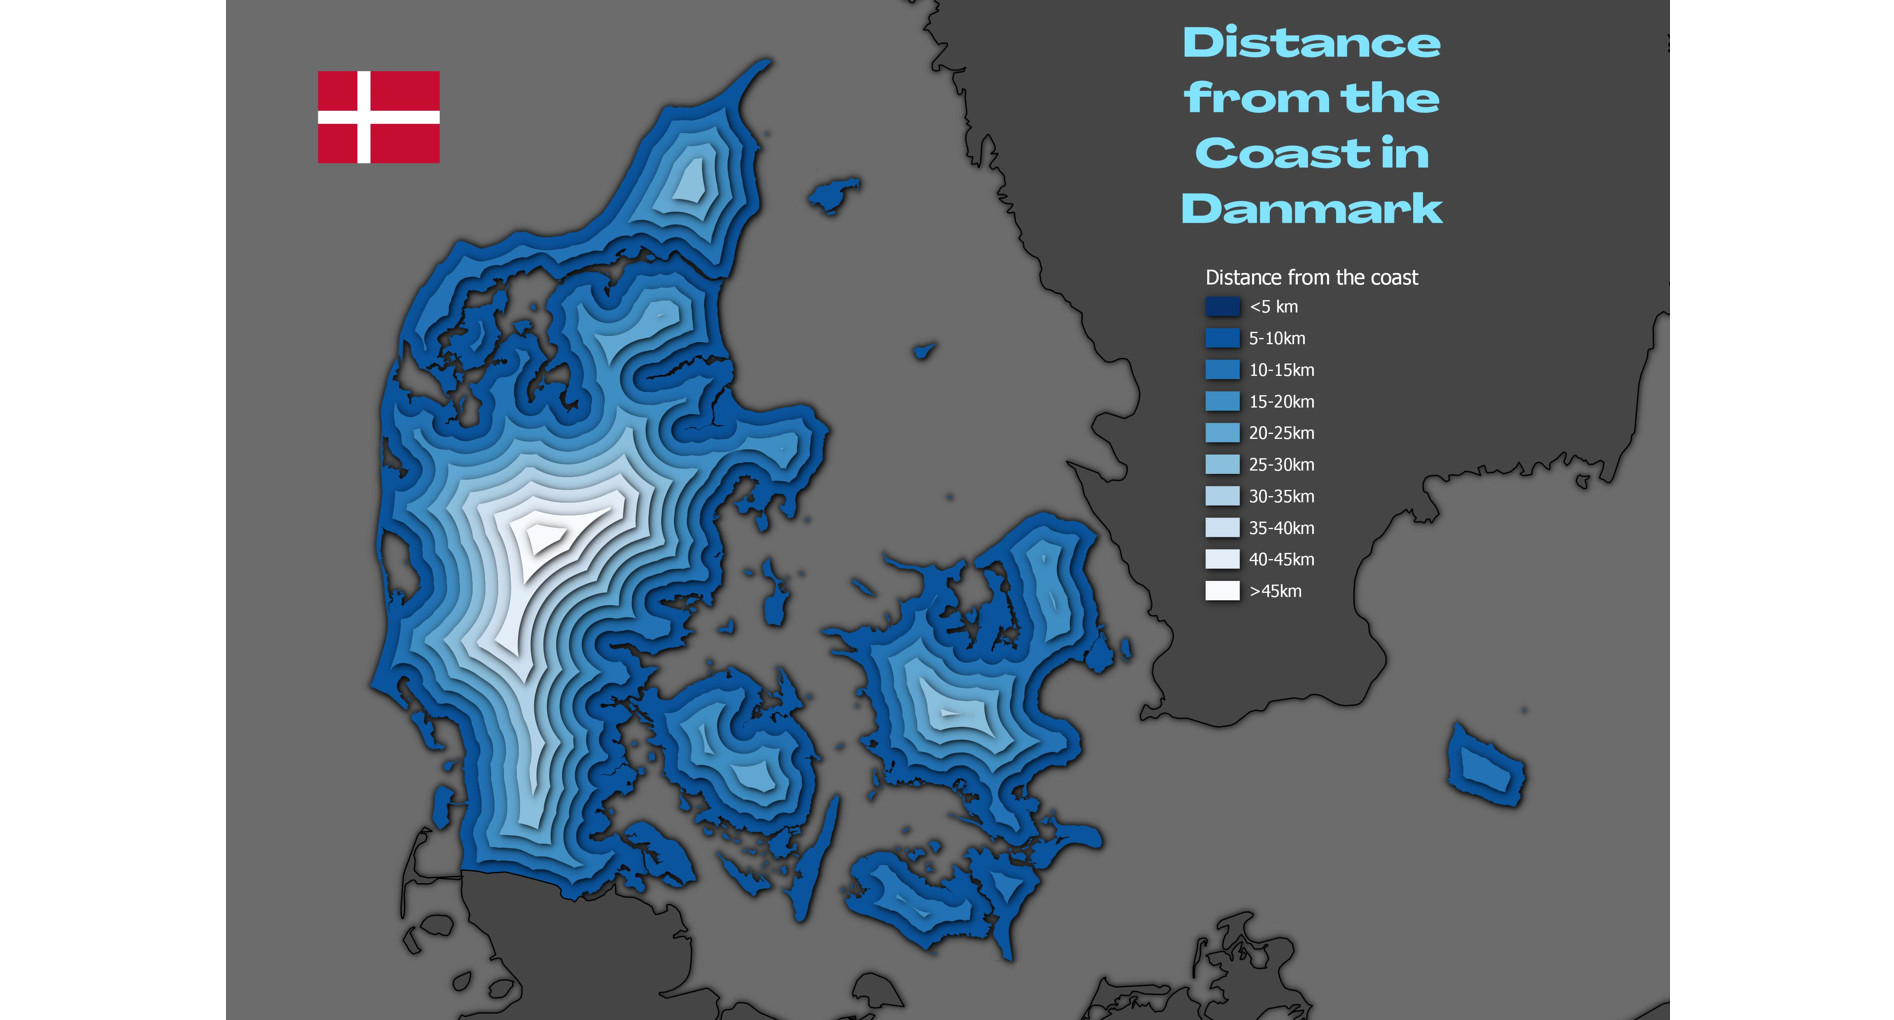 Distance from the Coast of Denmark